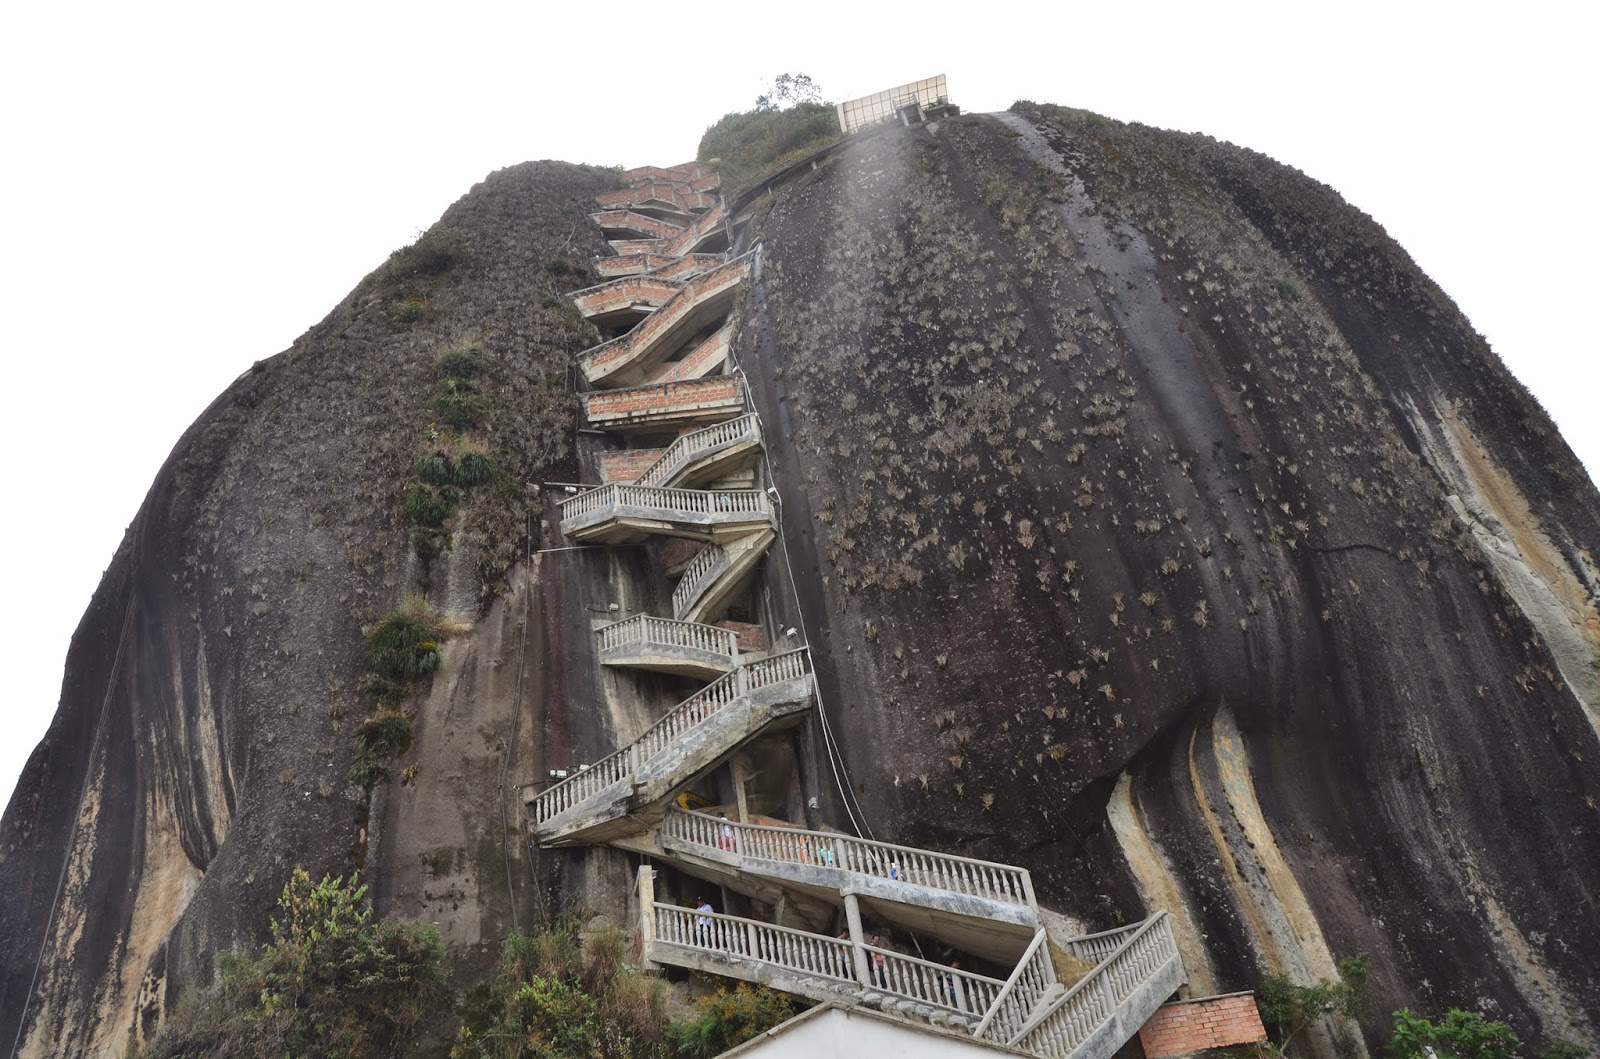 Stairway up to the top of the rock of El Peñol, Antioquia, Colombia